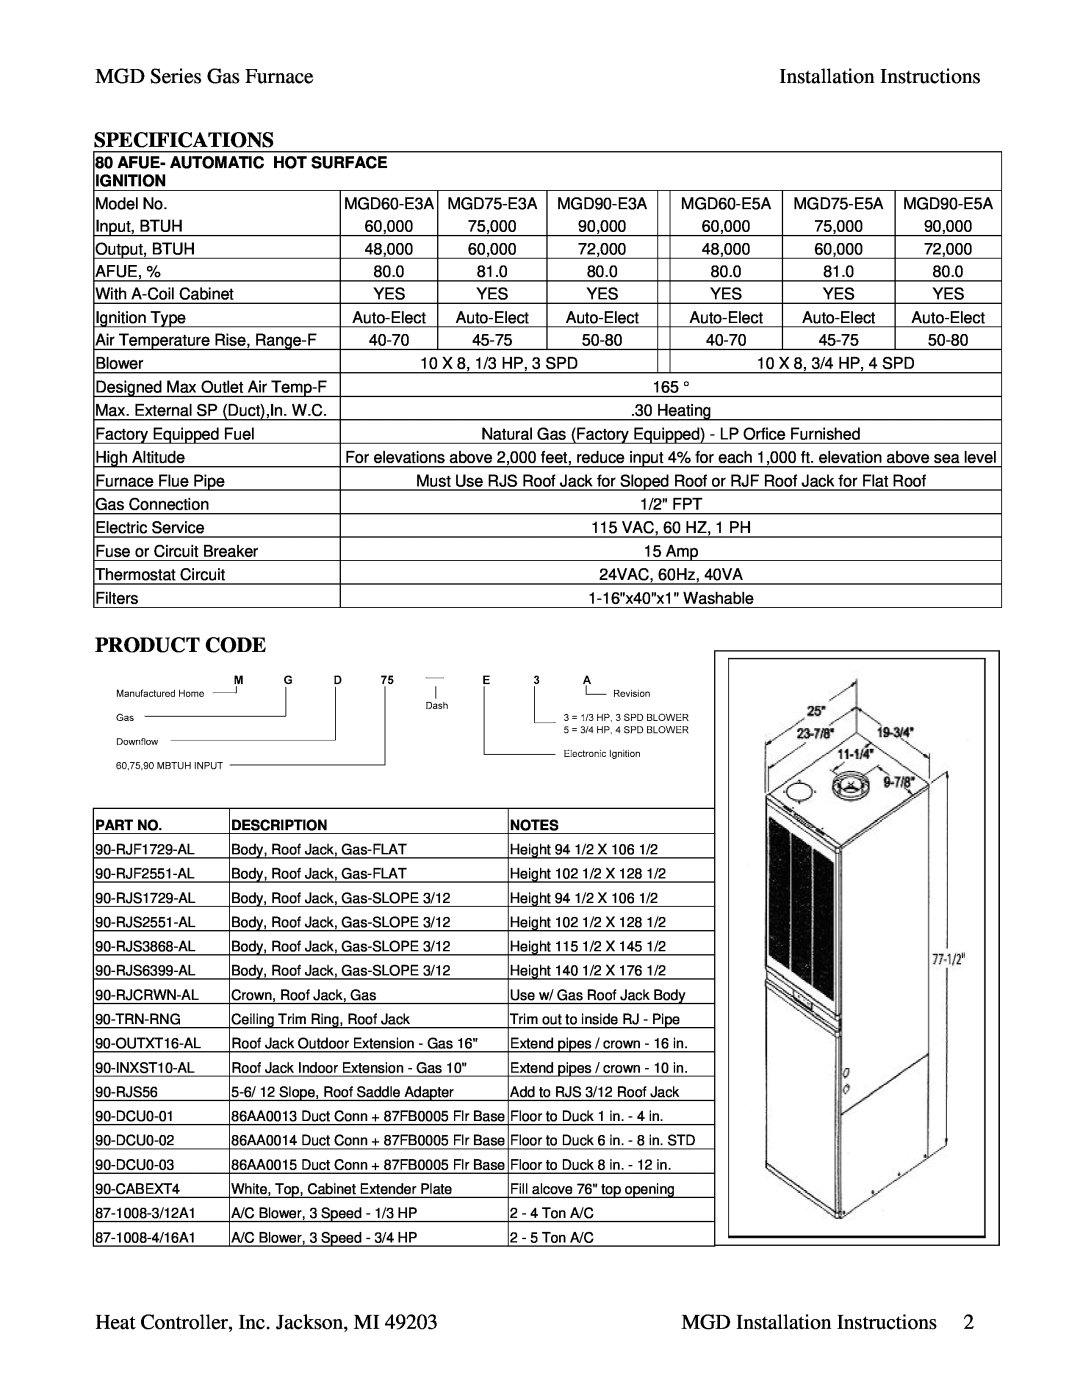 Heat Controller MGD75-E5A MGD Series Gas Furnace, Installation Instructions, Specifications, Product Code, Ignition 